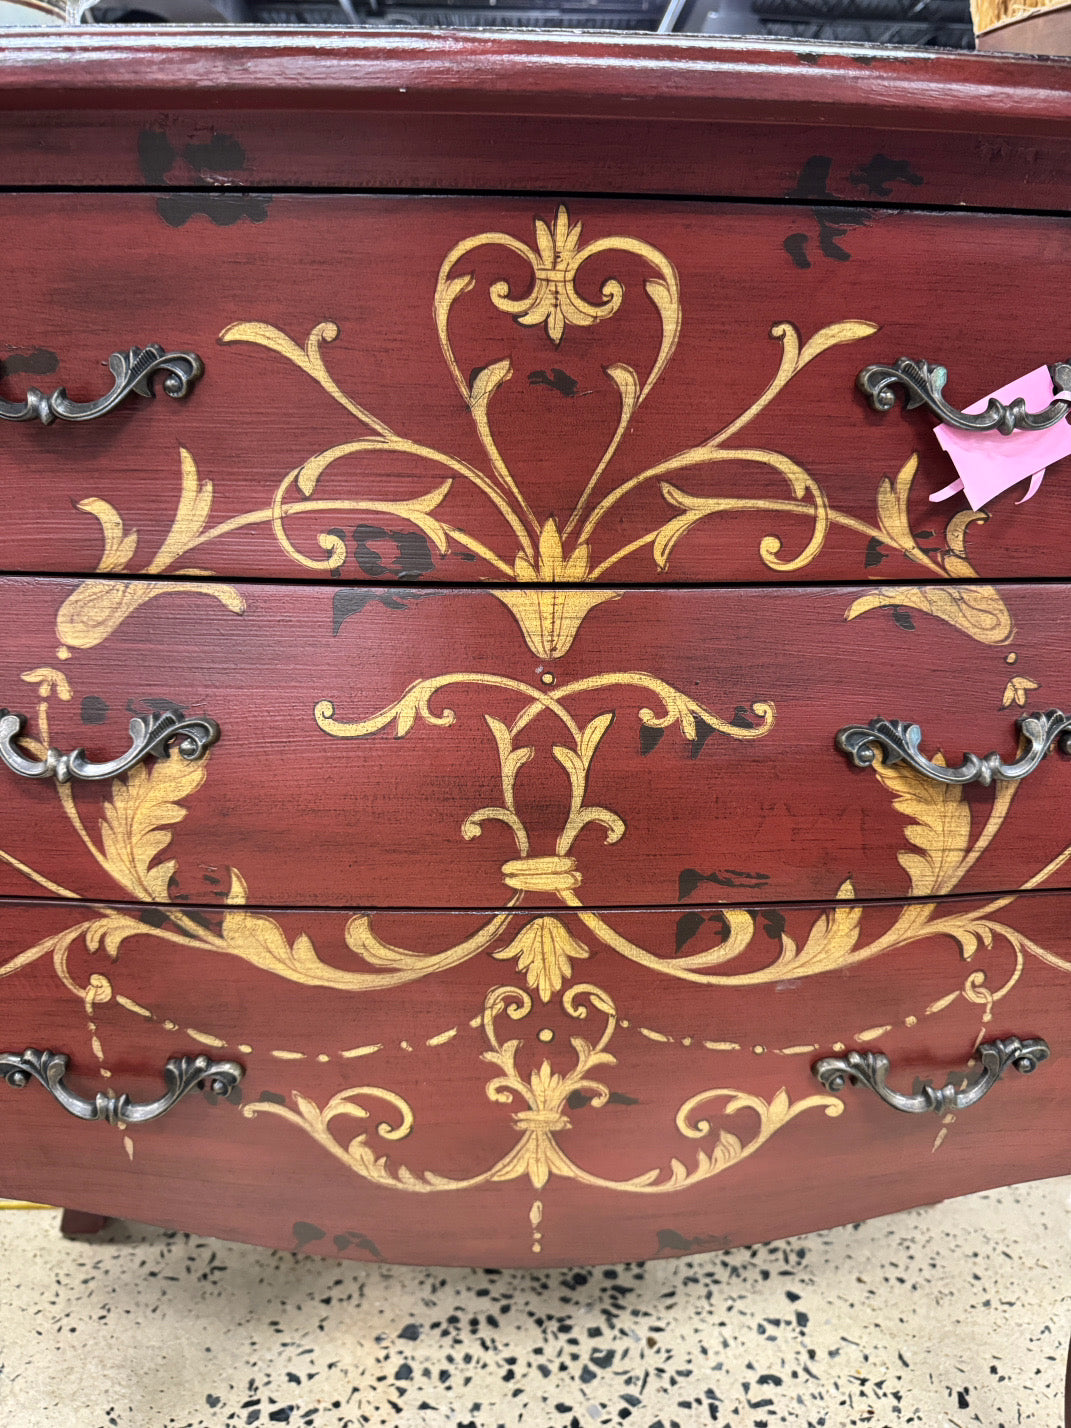 Red & Gold Bombay 3 Drawer Chest